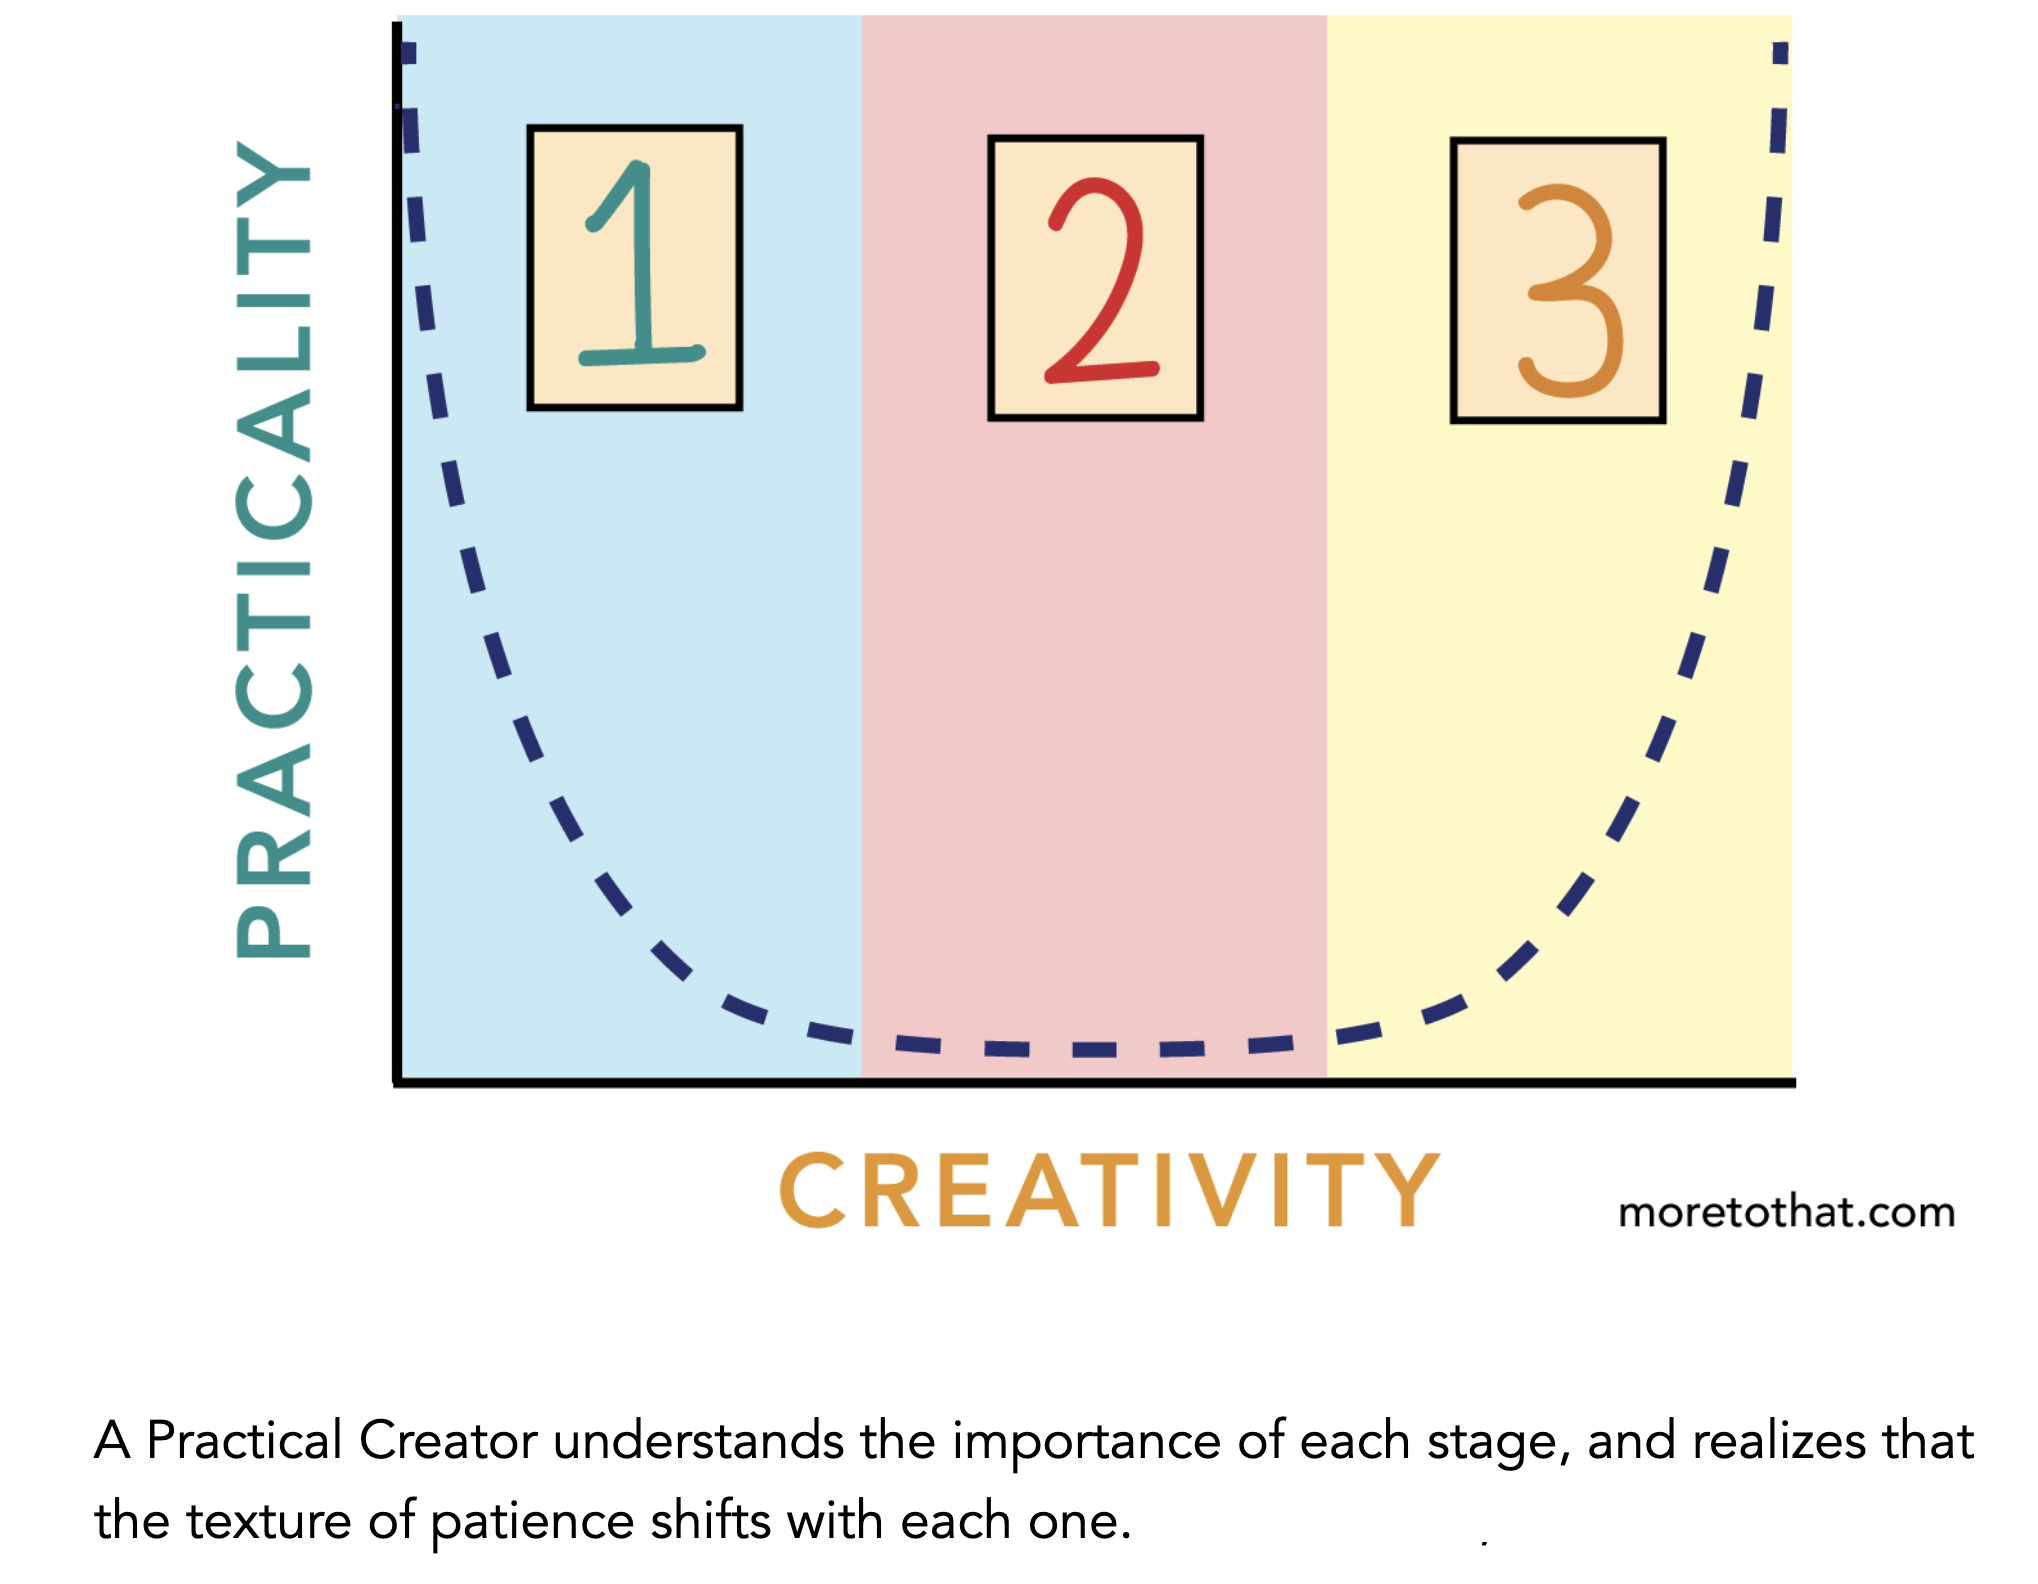 arc of the practical creator image